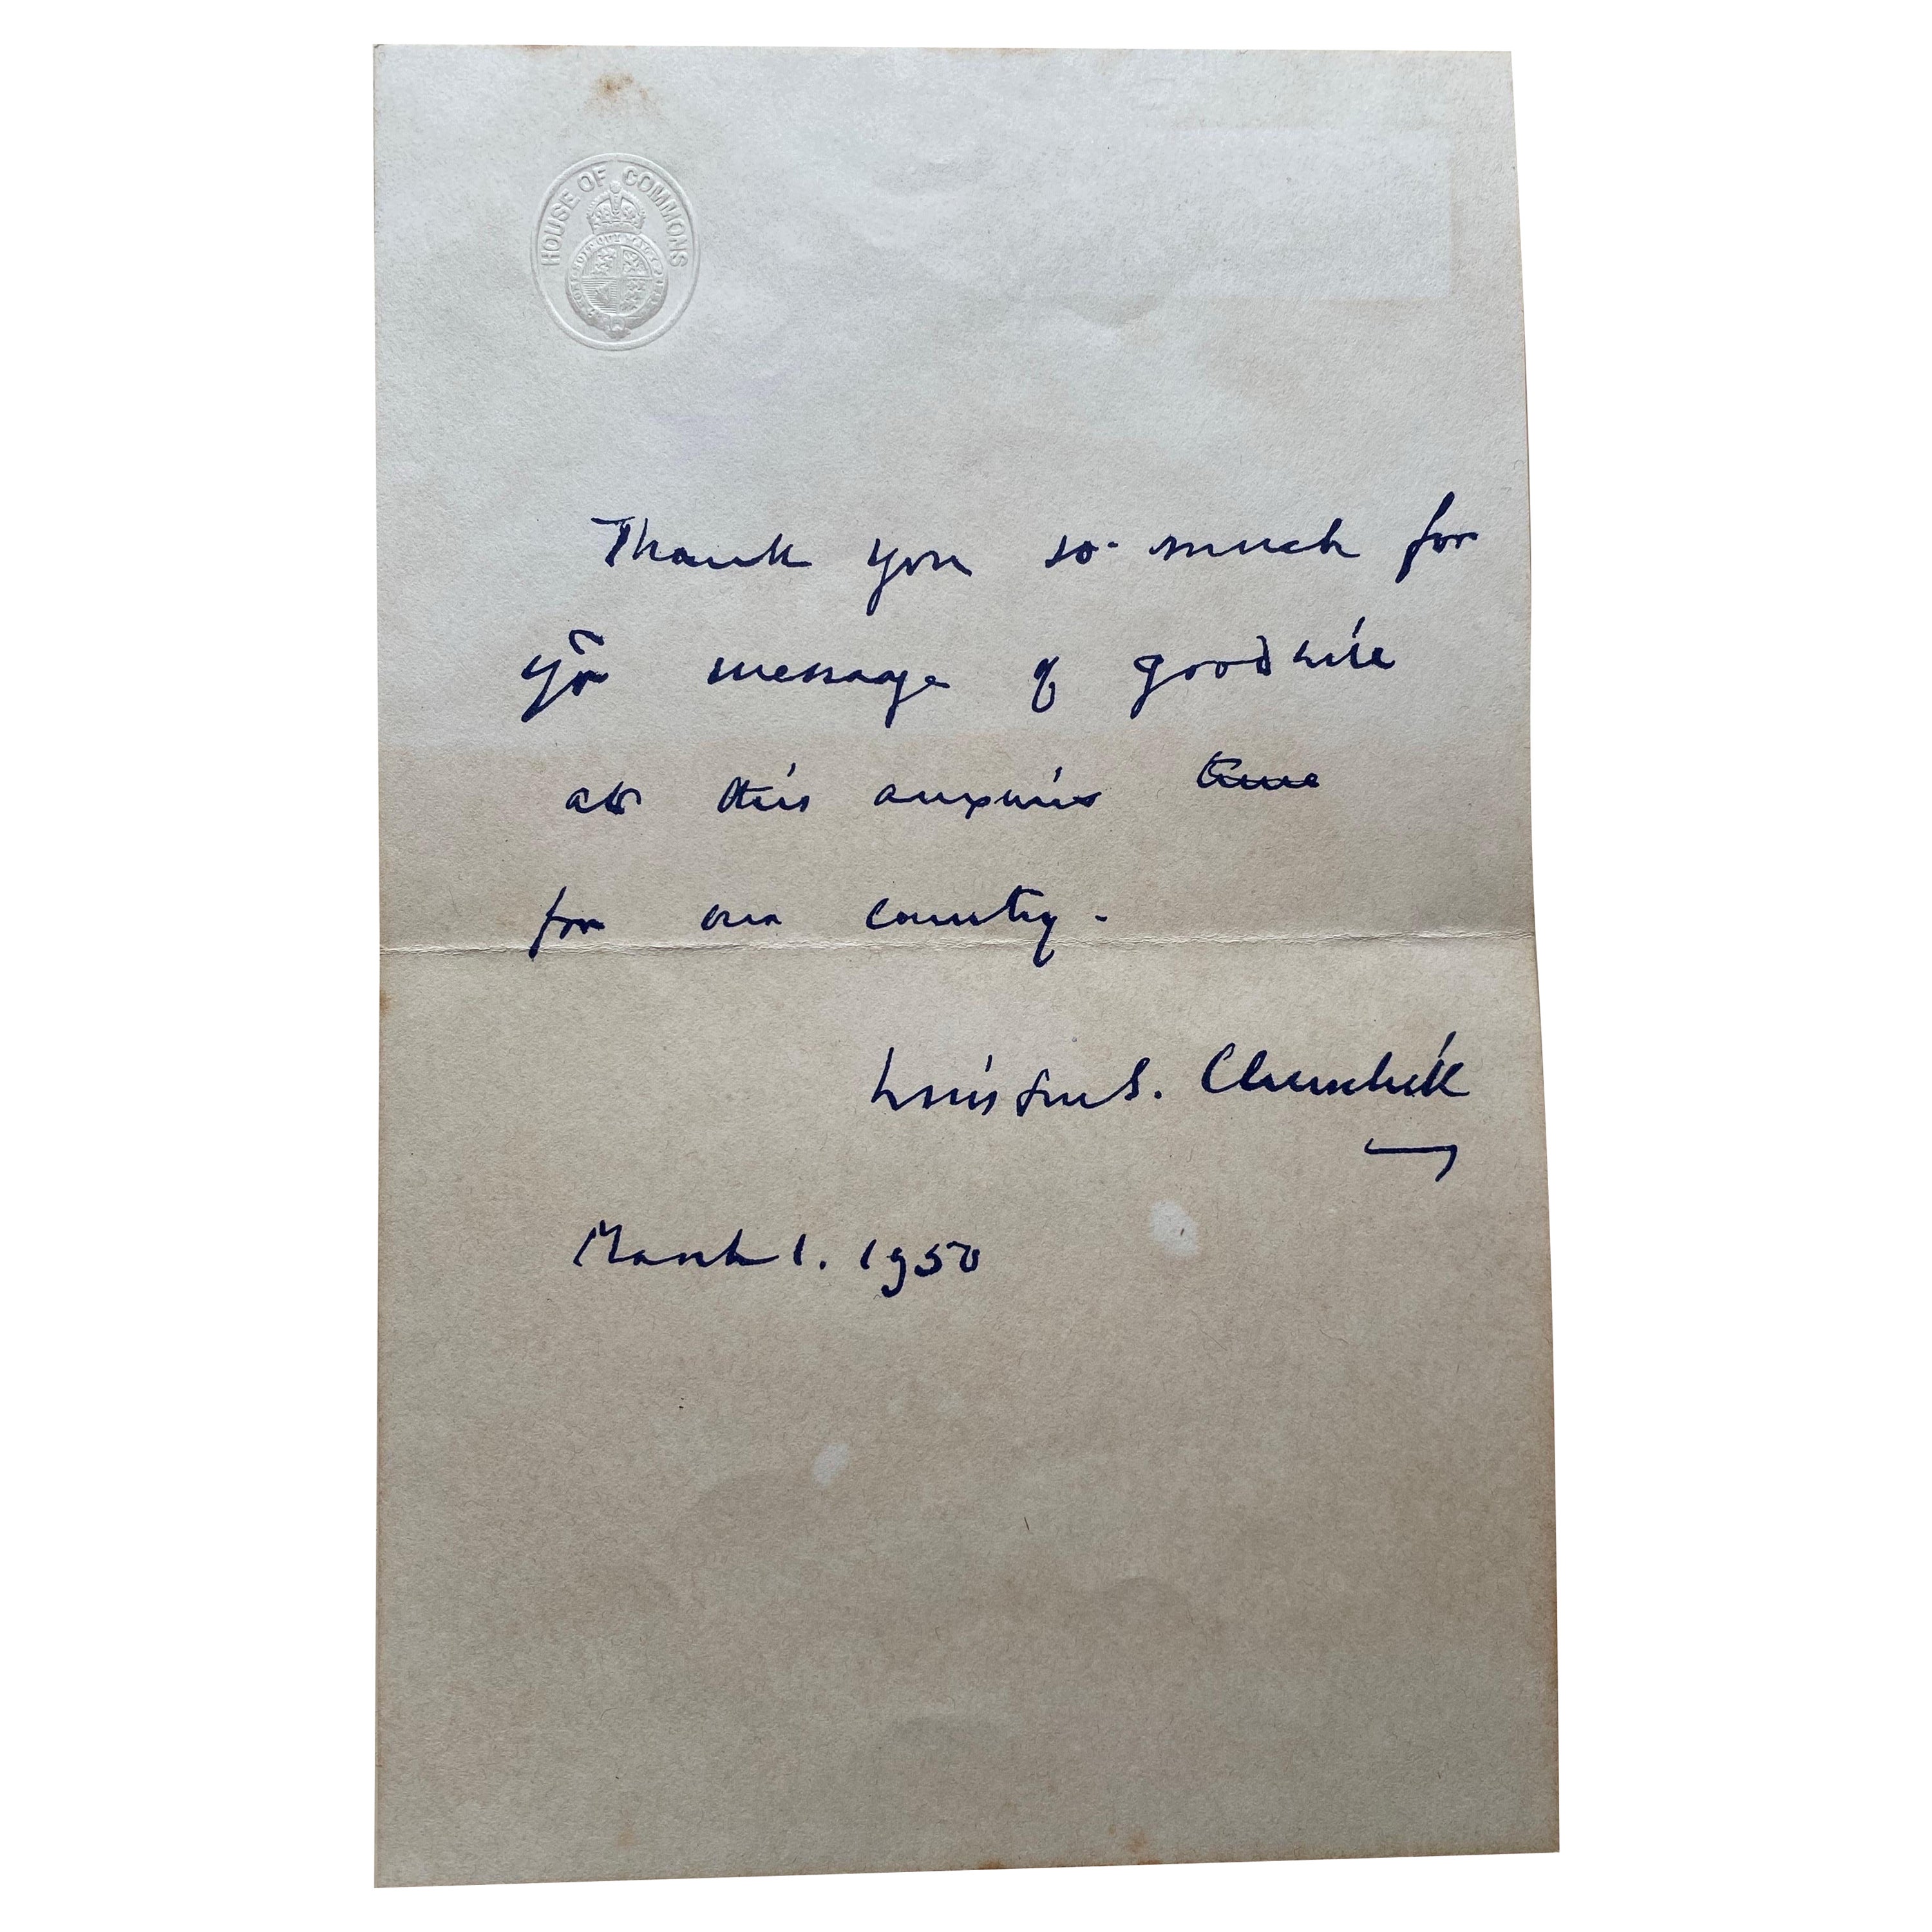 Signed, Handwritten Letter from Winston Churchill dated 1950 with Envelope.